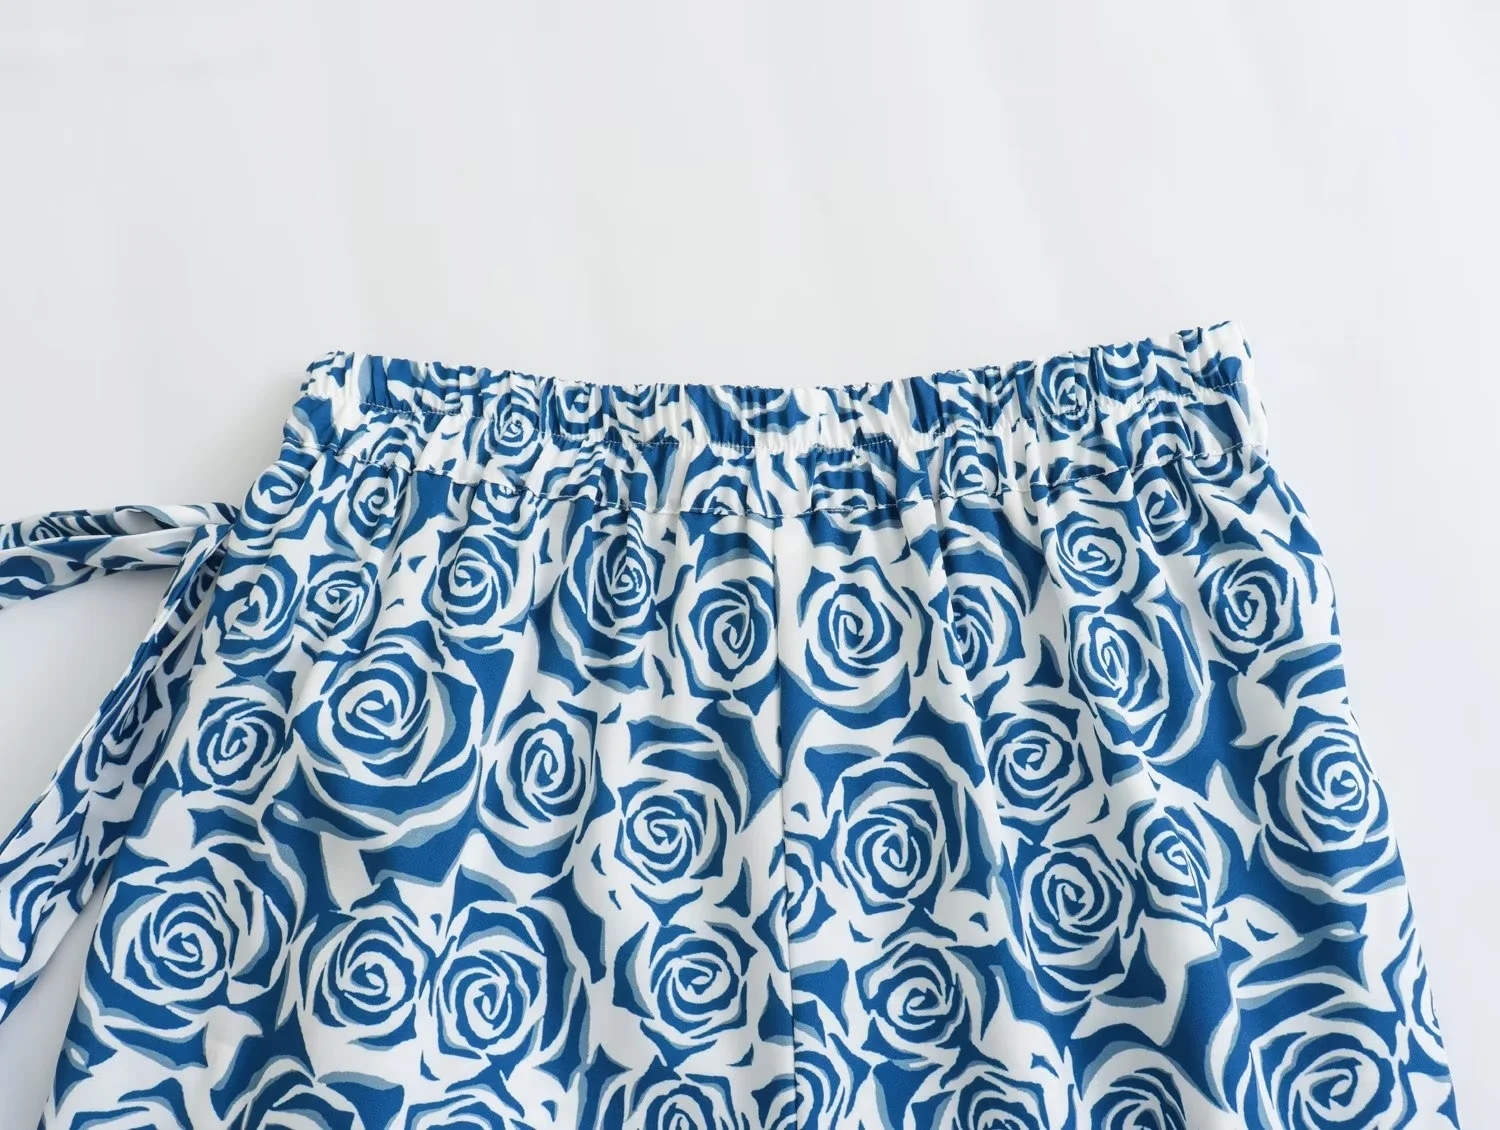 Fashion Blue Polyester Printed Lace Lace-up Skirt,Skirts